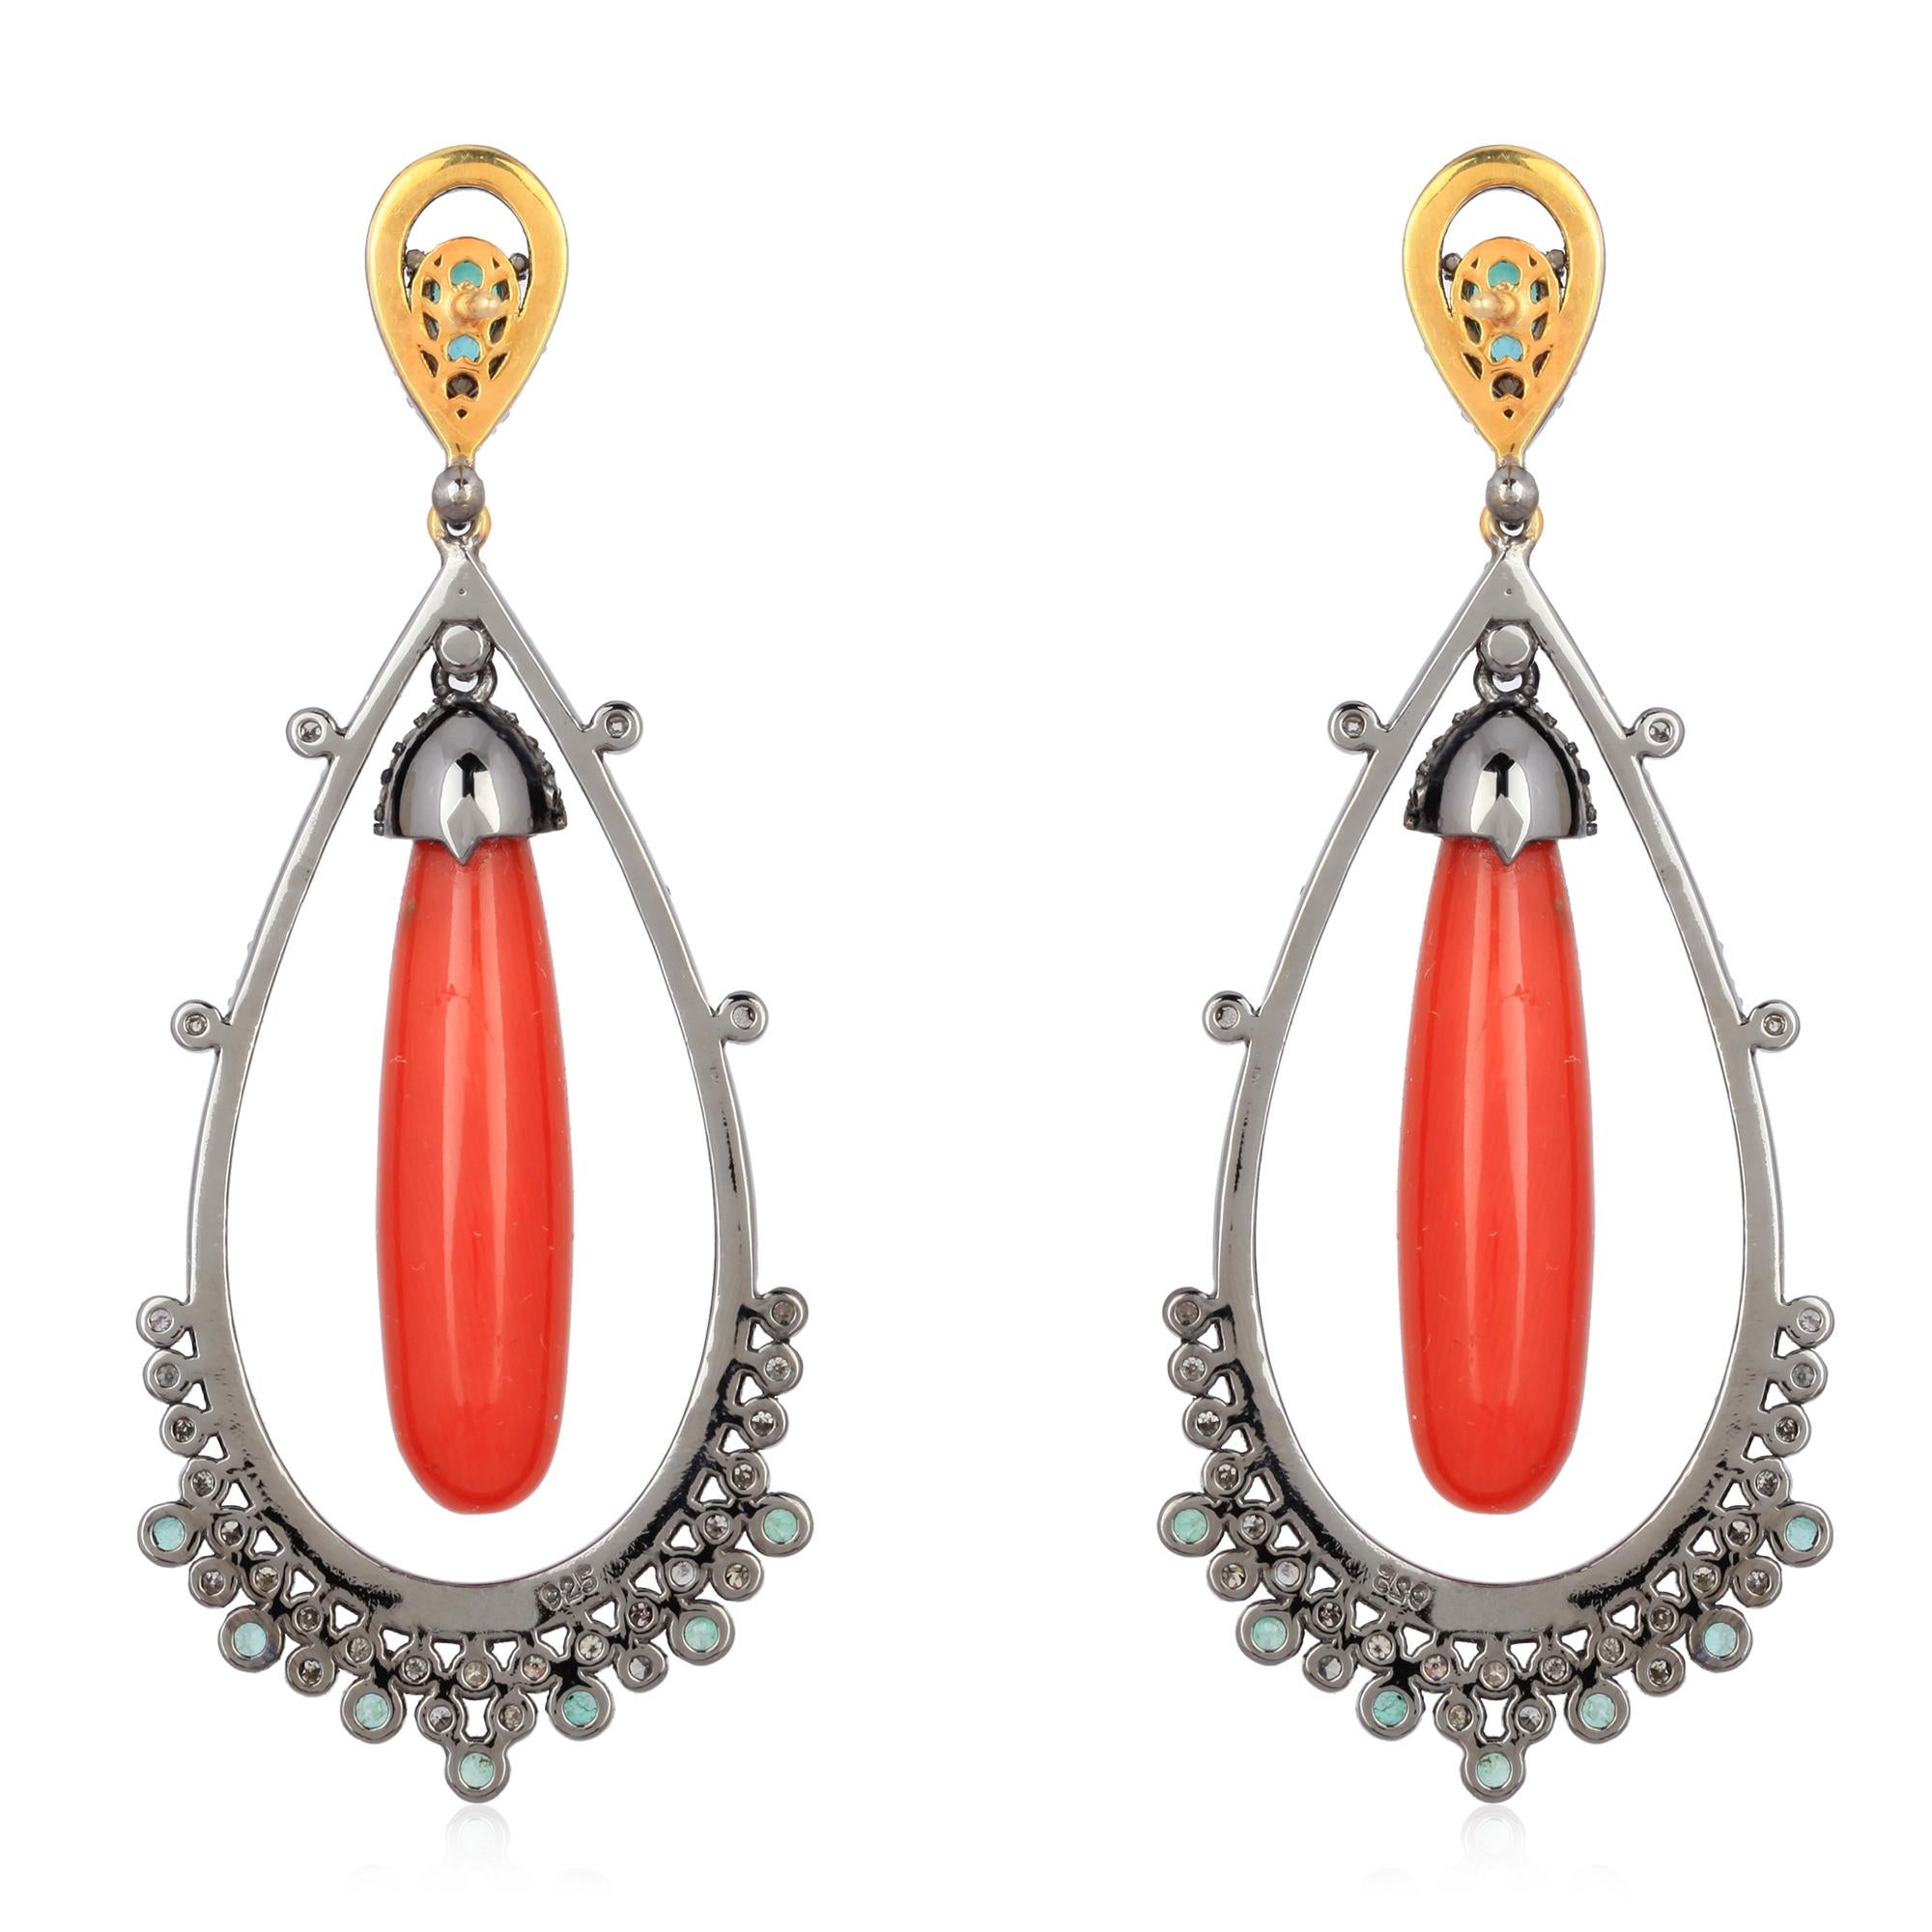 These stunning earrings are crafted in 18-karat gold and sterling silver. It is hand set in 20.50 carats coral, 2.16 carats emerald and 1.81 carats of glimmering diamonds.

FOLLOW  MEGHNA JEWELS storefront to view the latest collection & exclusive